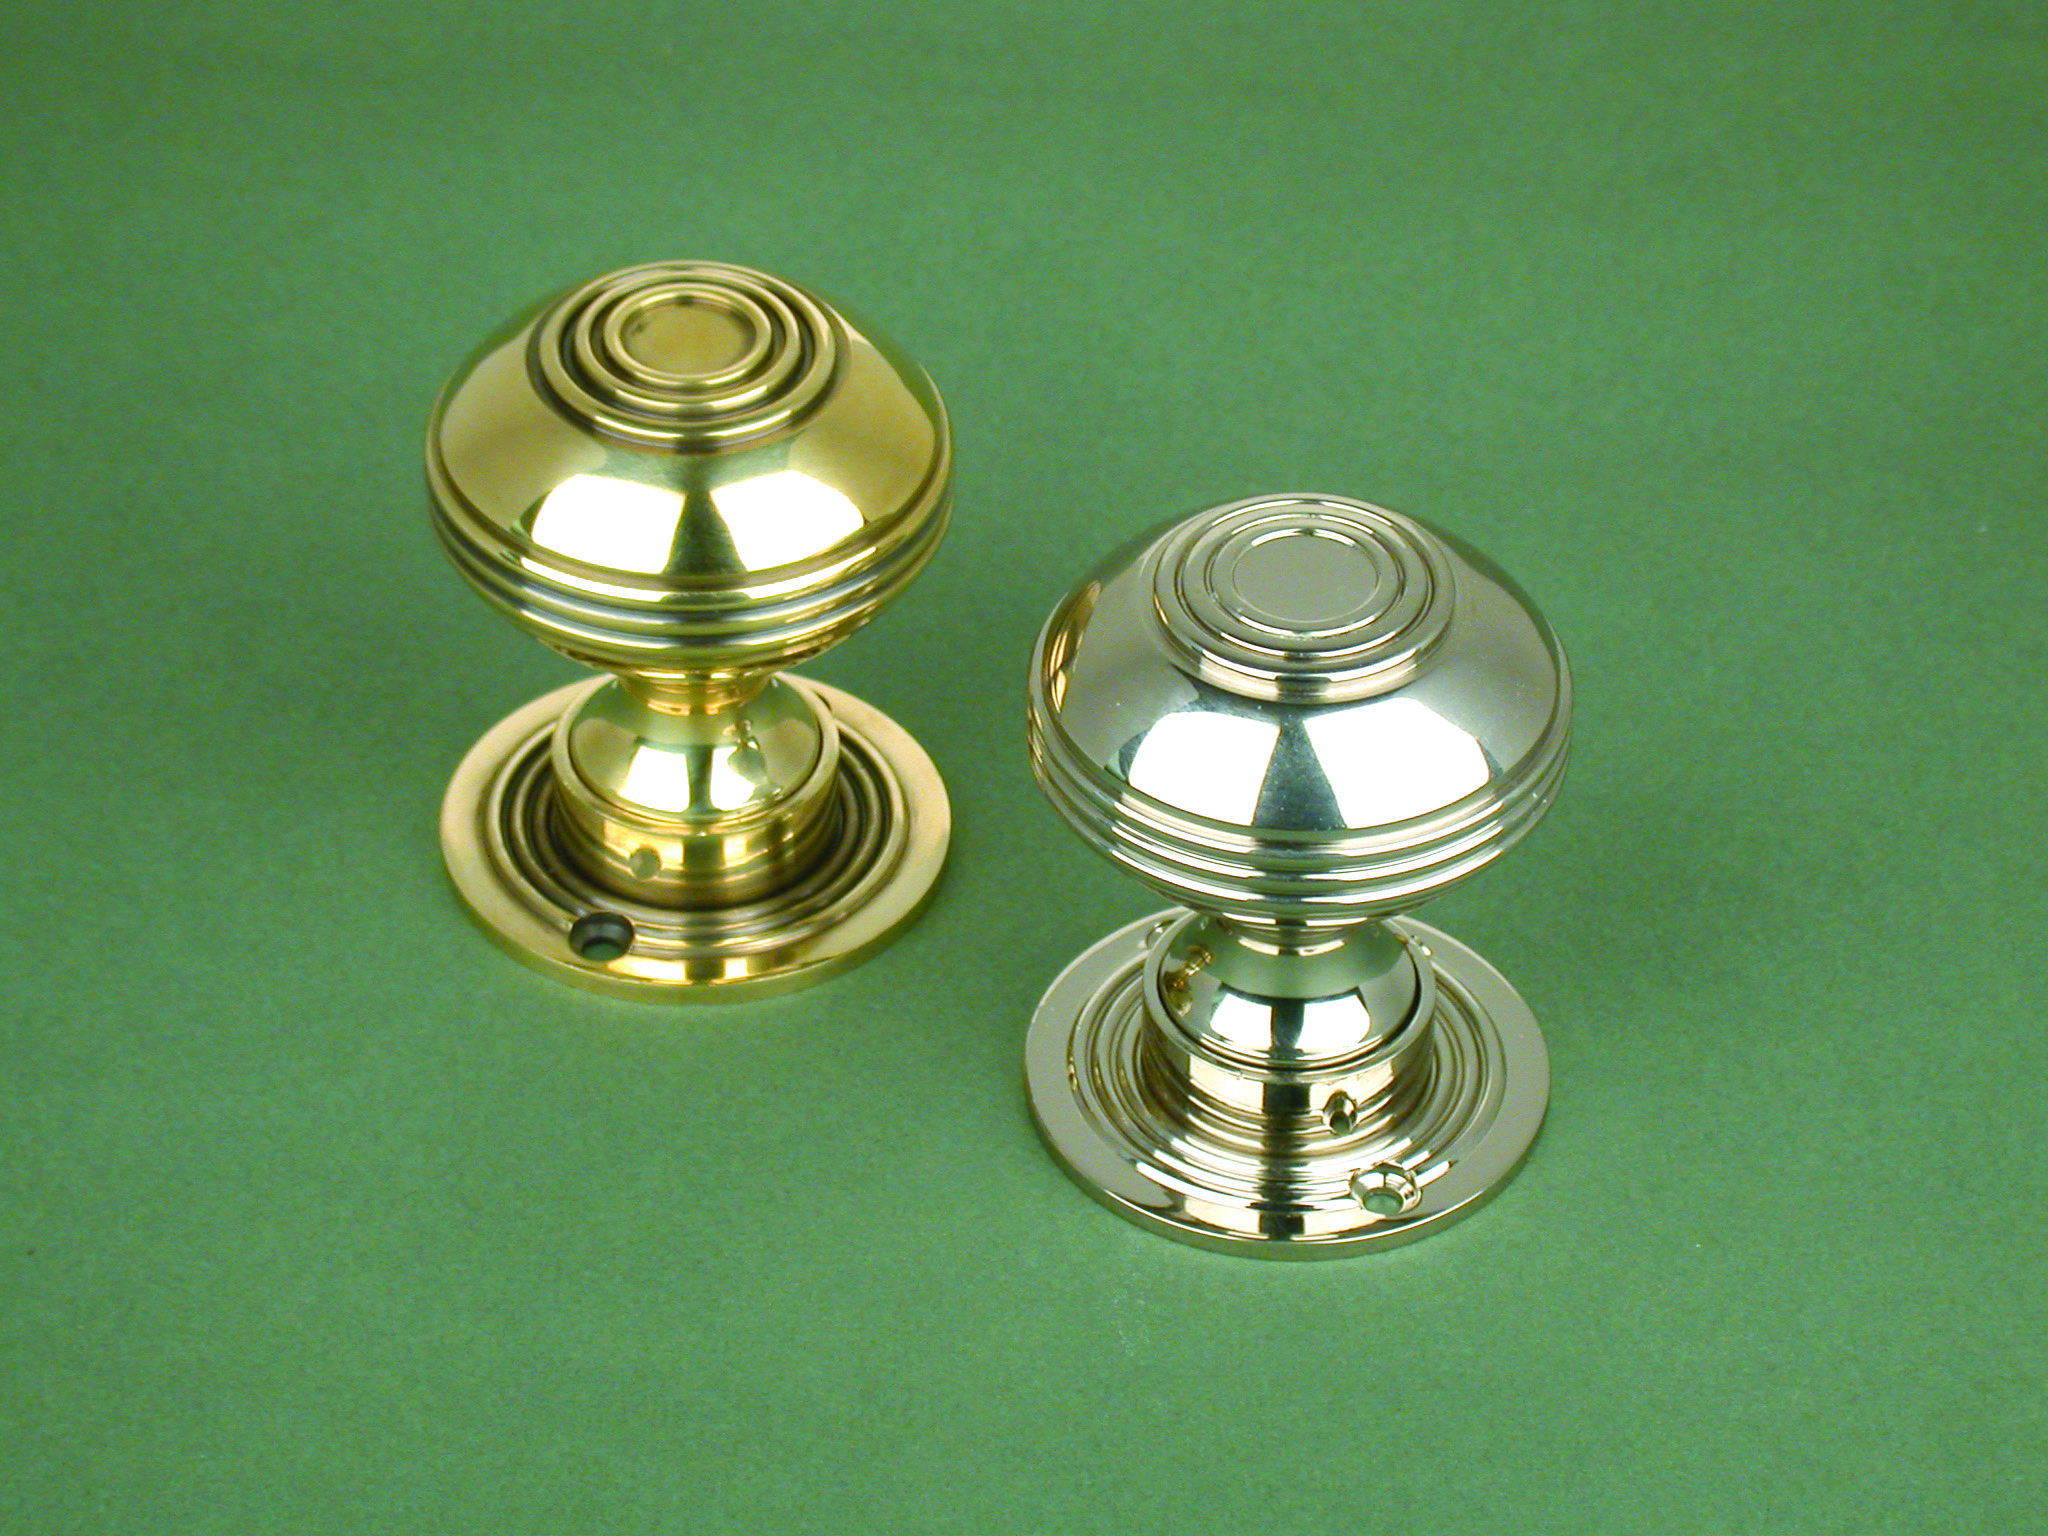 Small Bloxwich Door Knobs in Aged Brass or Polished Nickel